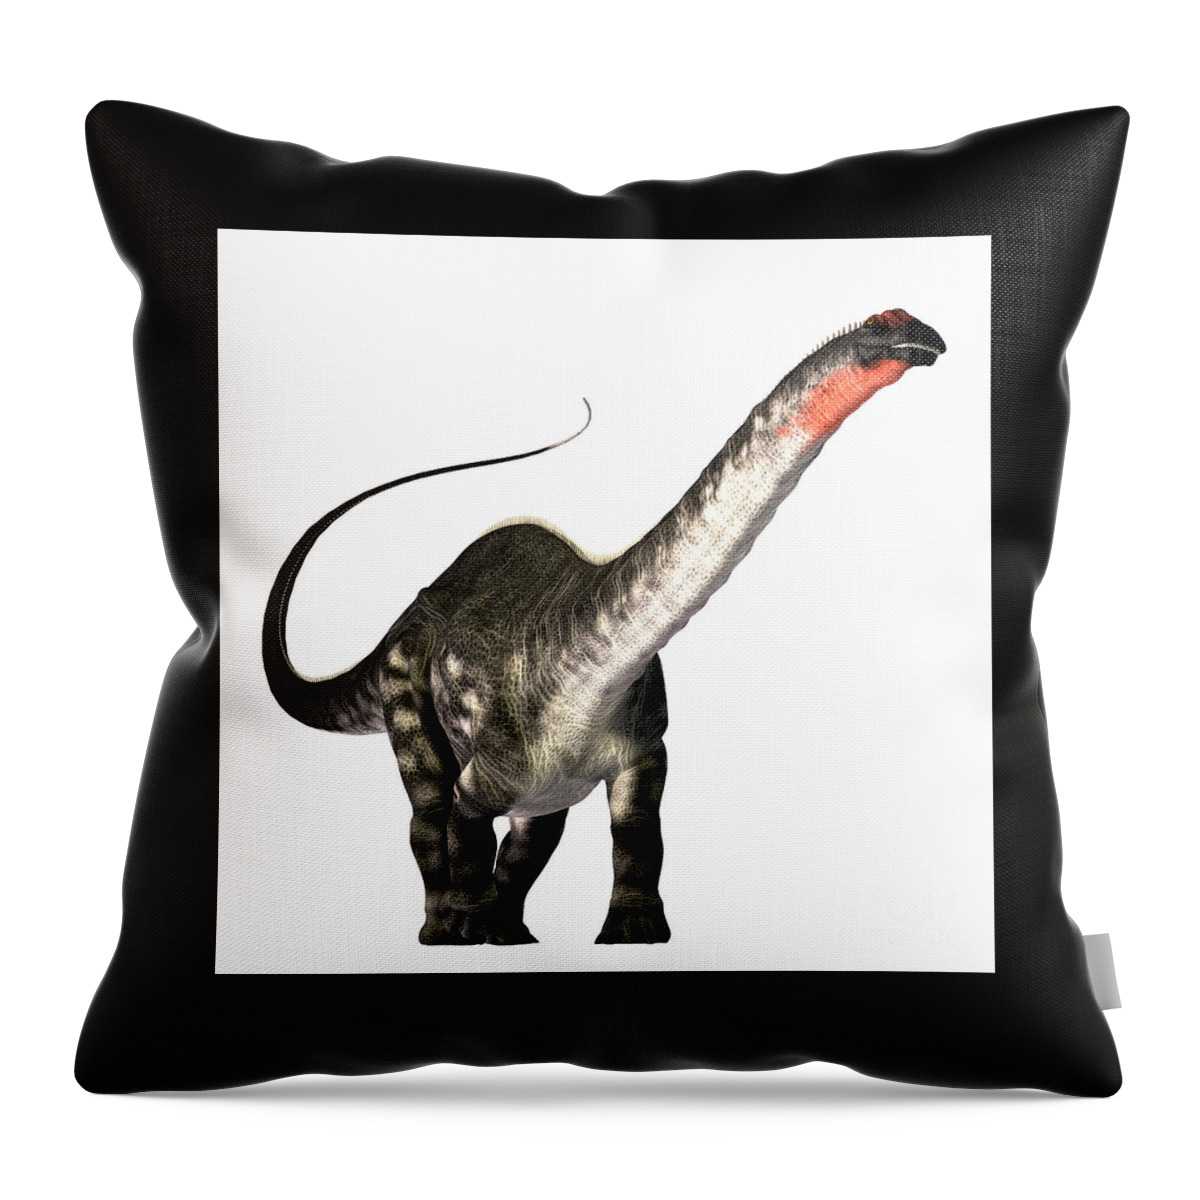 Apatosaurus Throw Pillow featuring the painting Apatosaurus Profile by Corey Ford